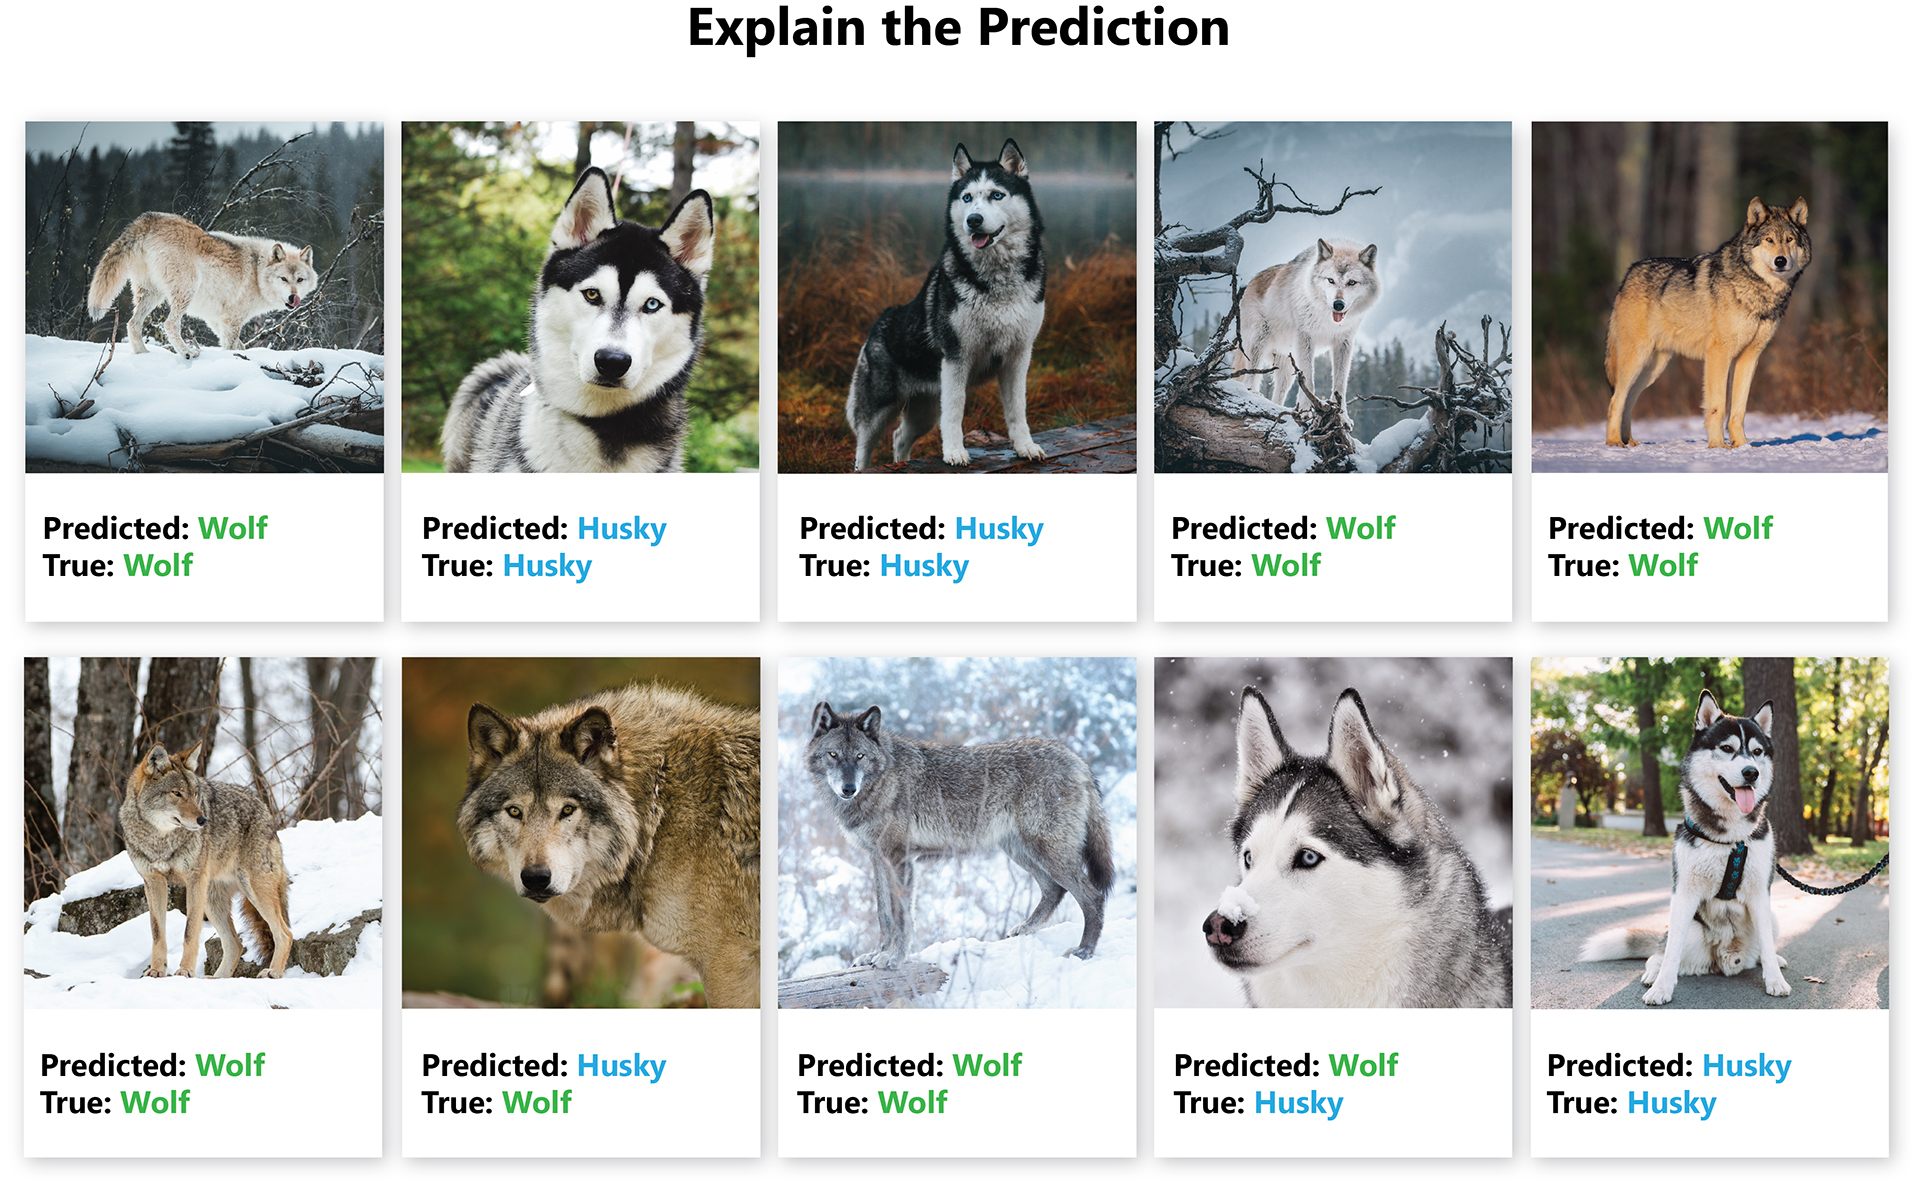 A collage of images of wolves and huskies that a machine learning model tried to decipher